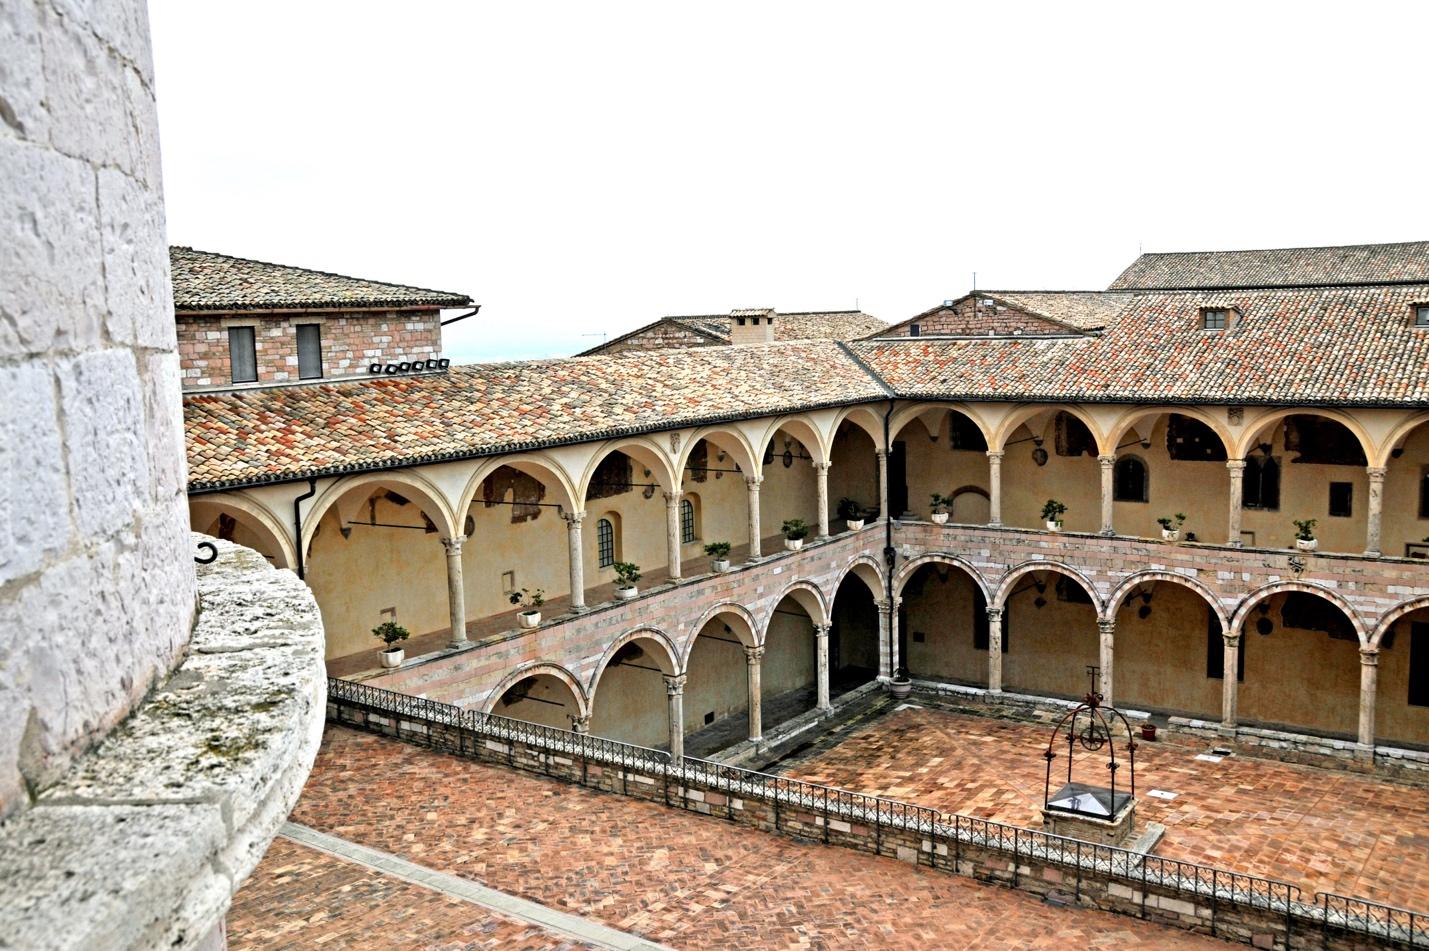 A photo of the courtyard of a large building, with porticos. Source: https://upload.wikimedia.org/wikipedia/commons/e/e8/%22_Basilica_di_San_Francesco_%28Assisi%29_Sacro_Convento_%22.jpg.